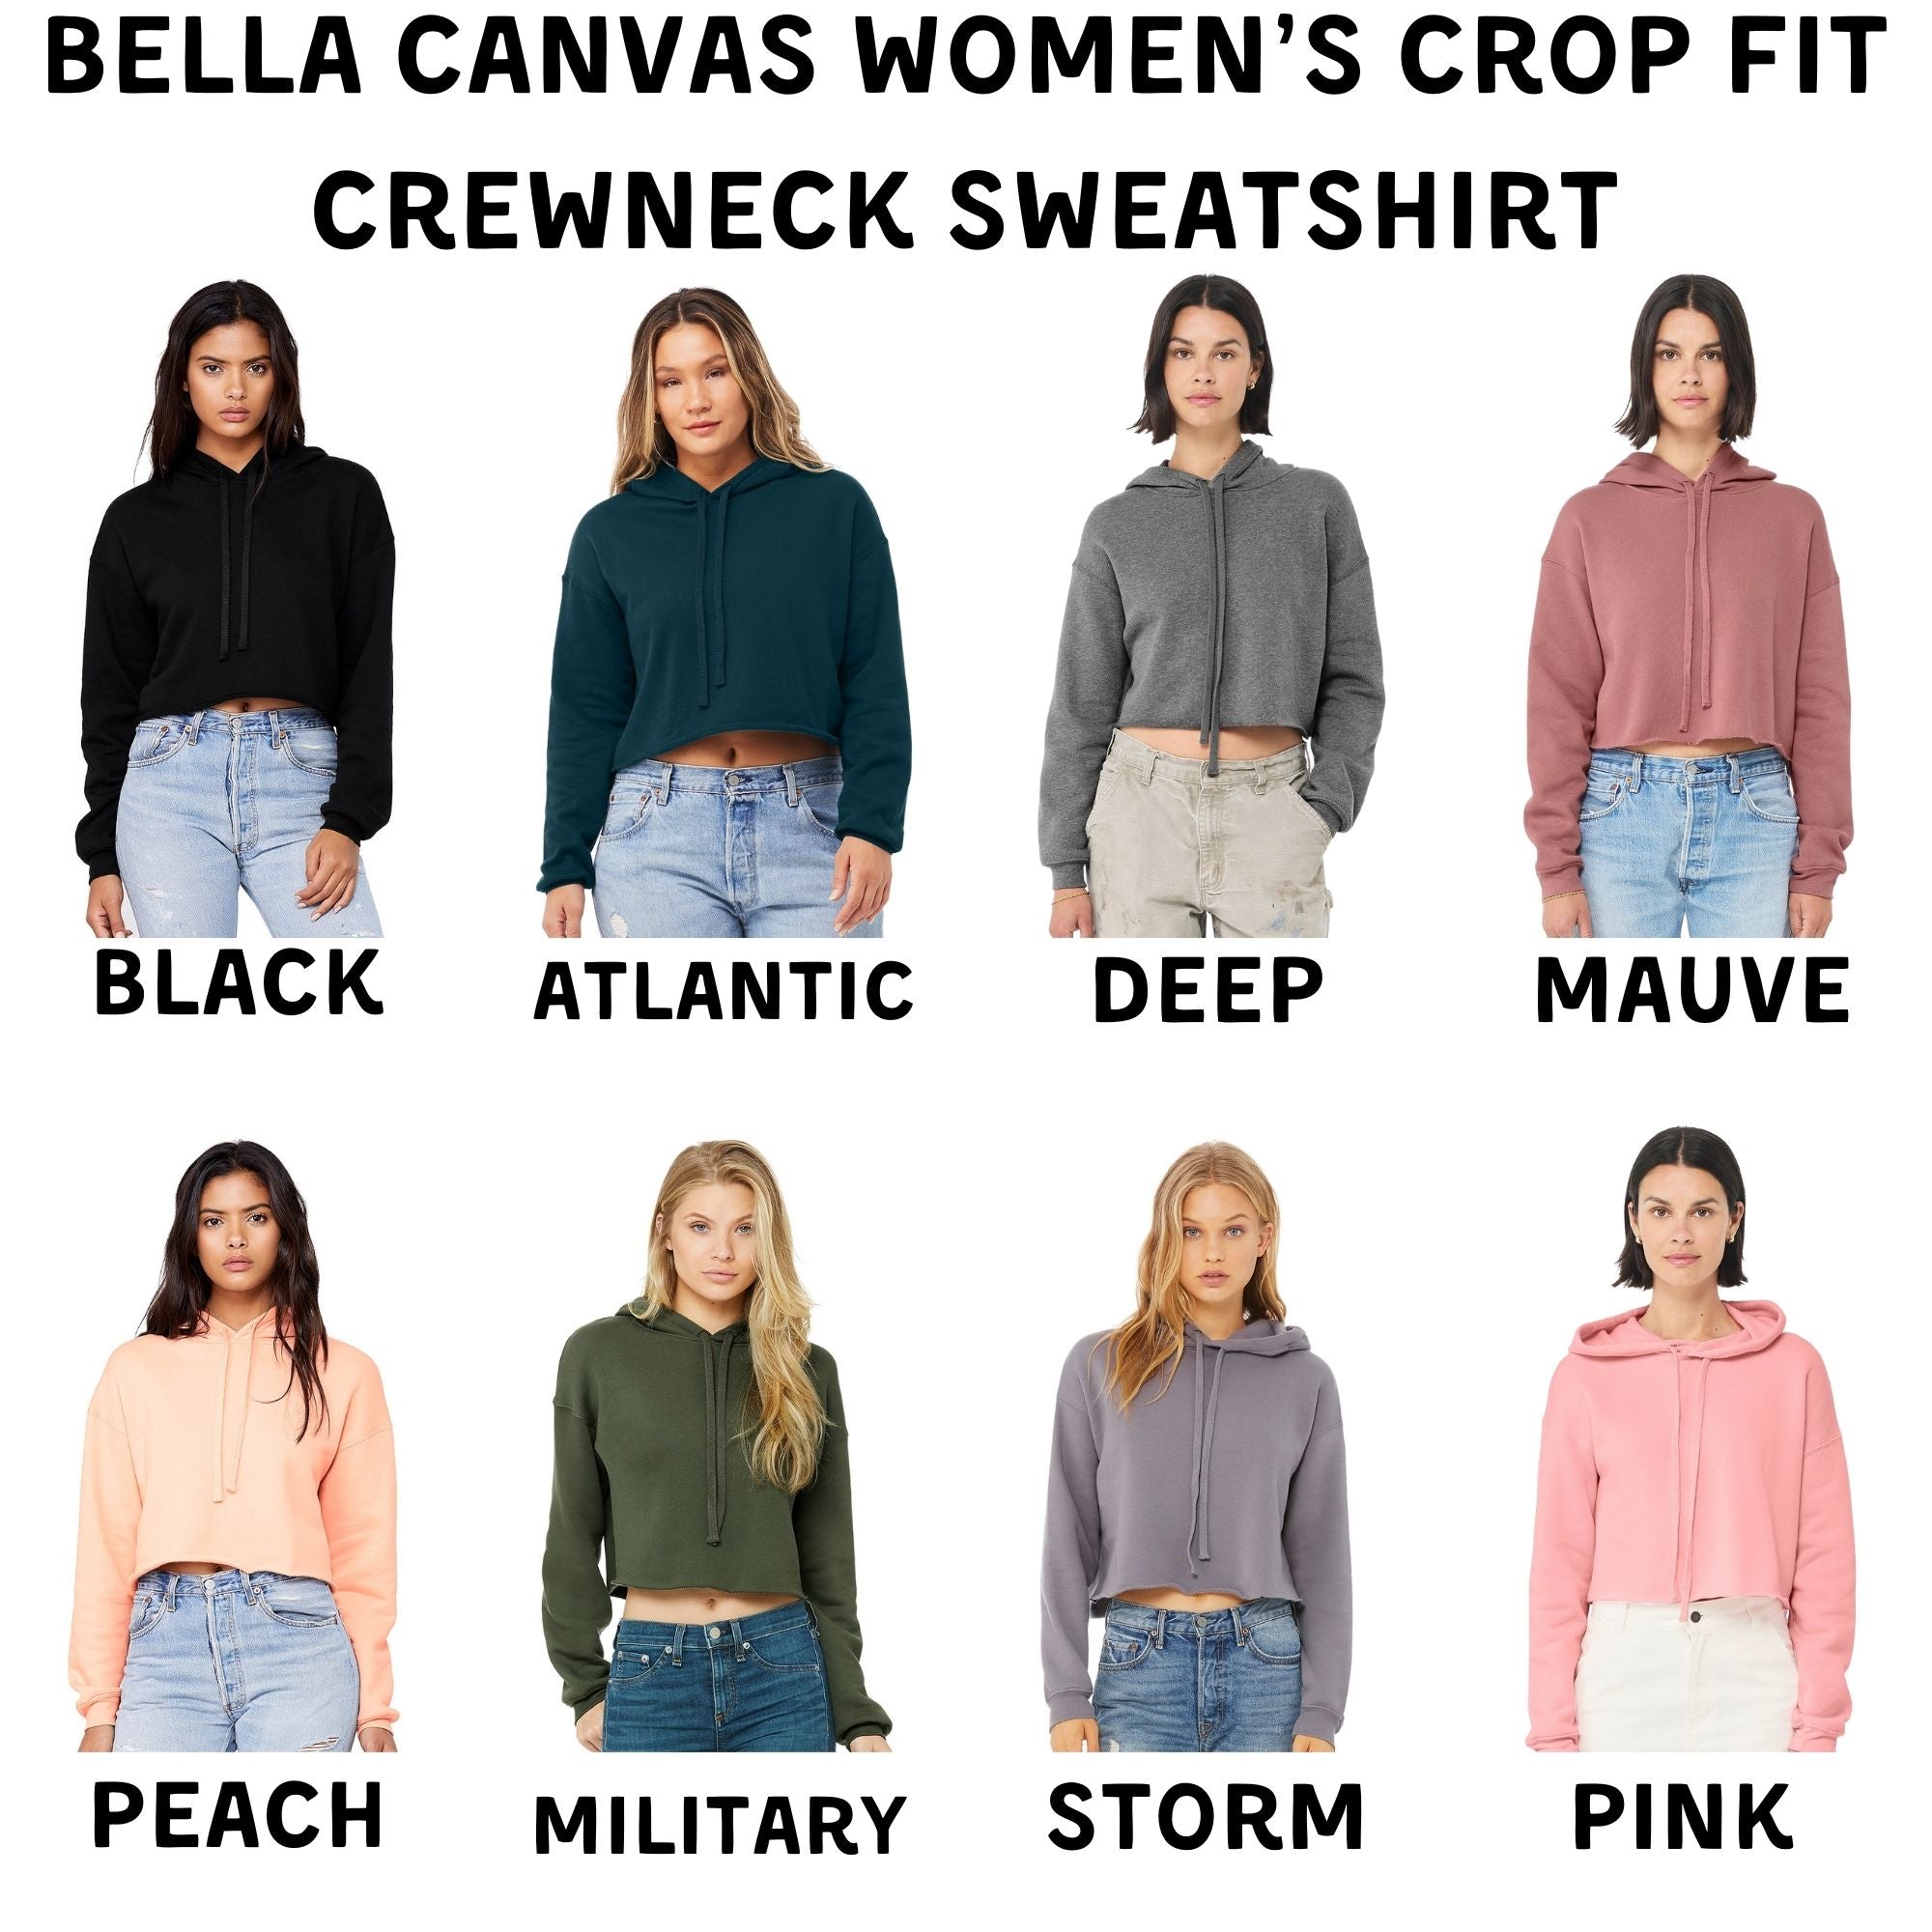 At Peace With Nature Bella Canvas Cropped Sweatshirt or Crop Hoodie *Women's Crop Fit*-208 Tees Wholesale, Idaho